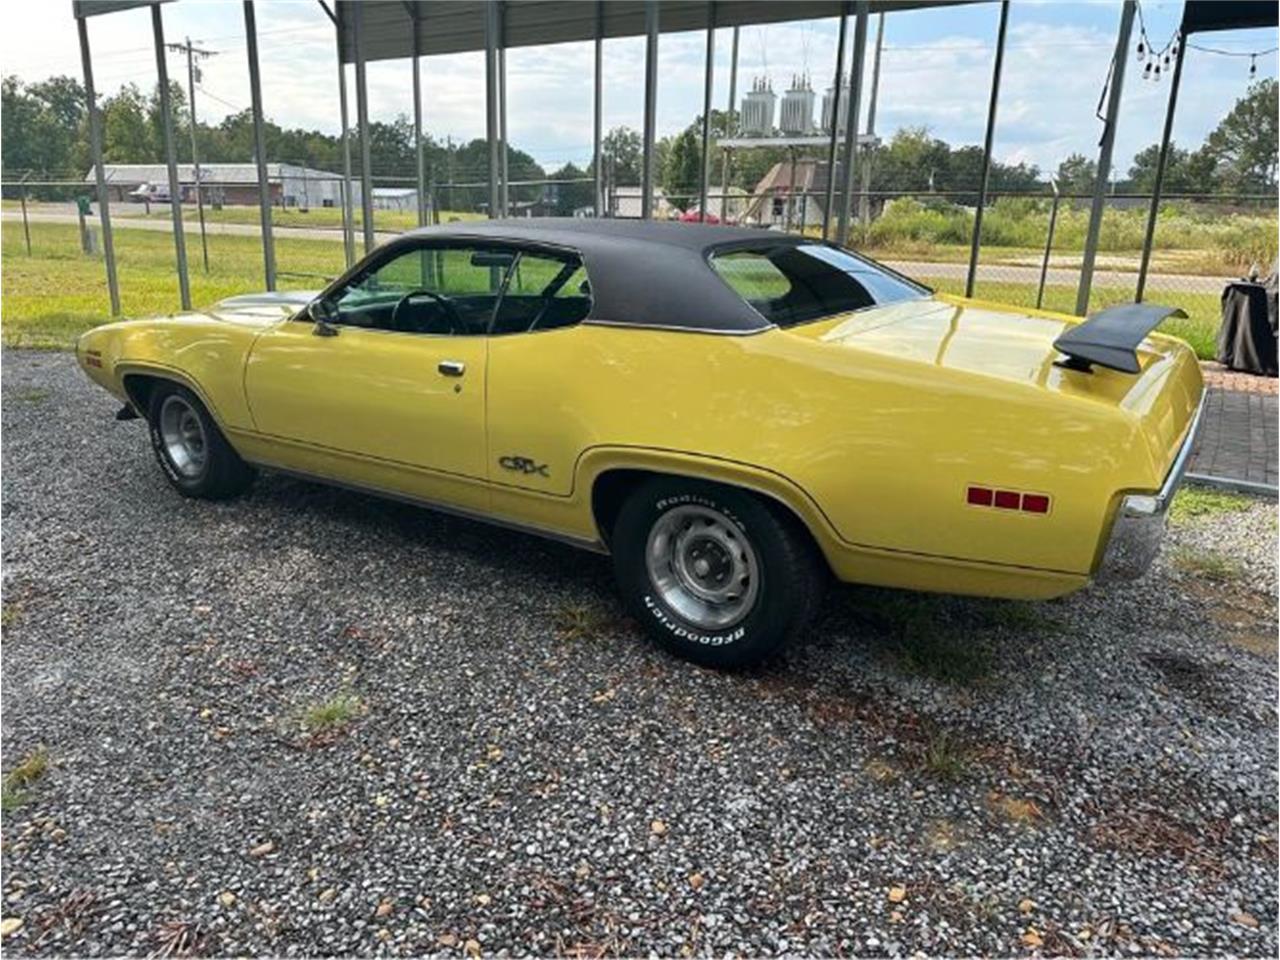 For Sale: 1971 Plymouth GTX in Cadillac, Michigan for sale in Cadillac, MI